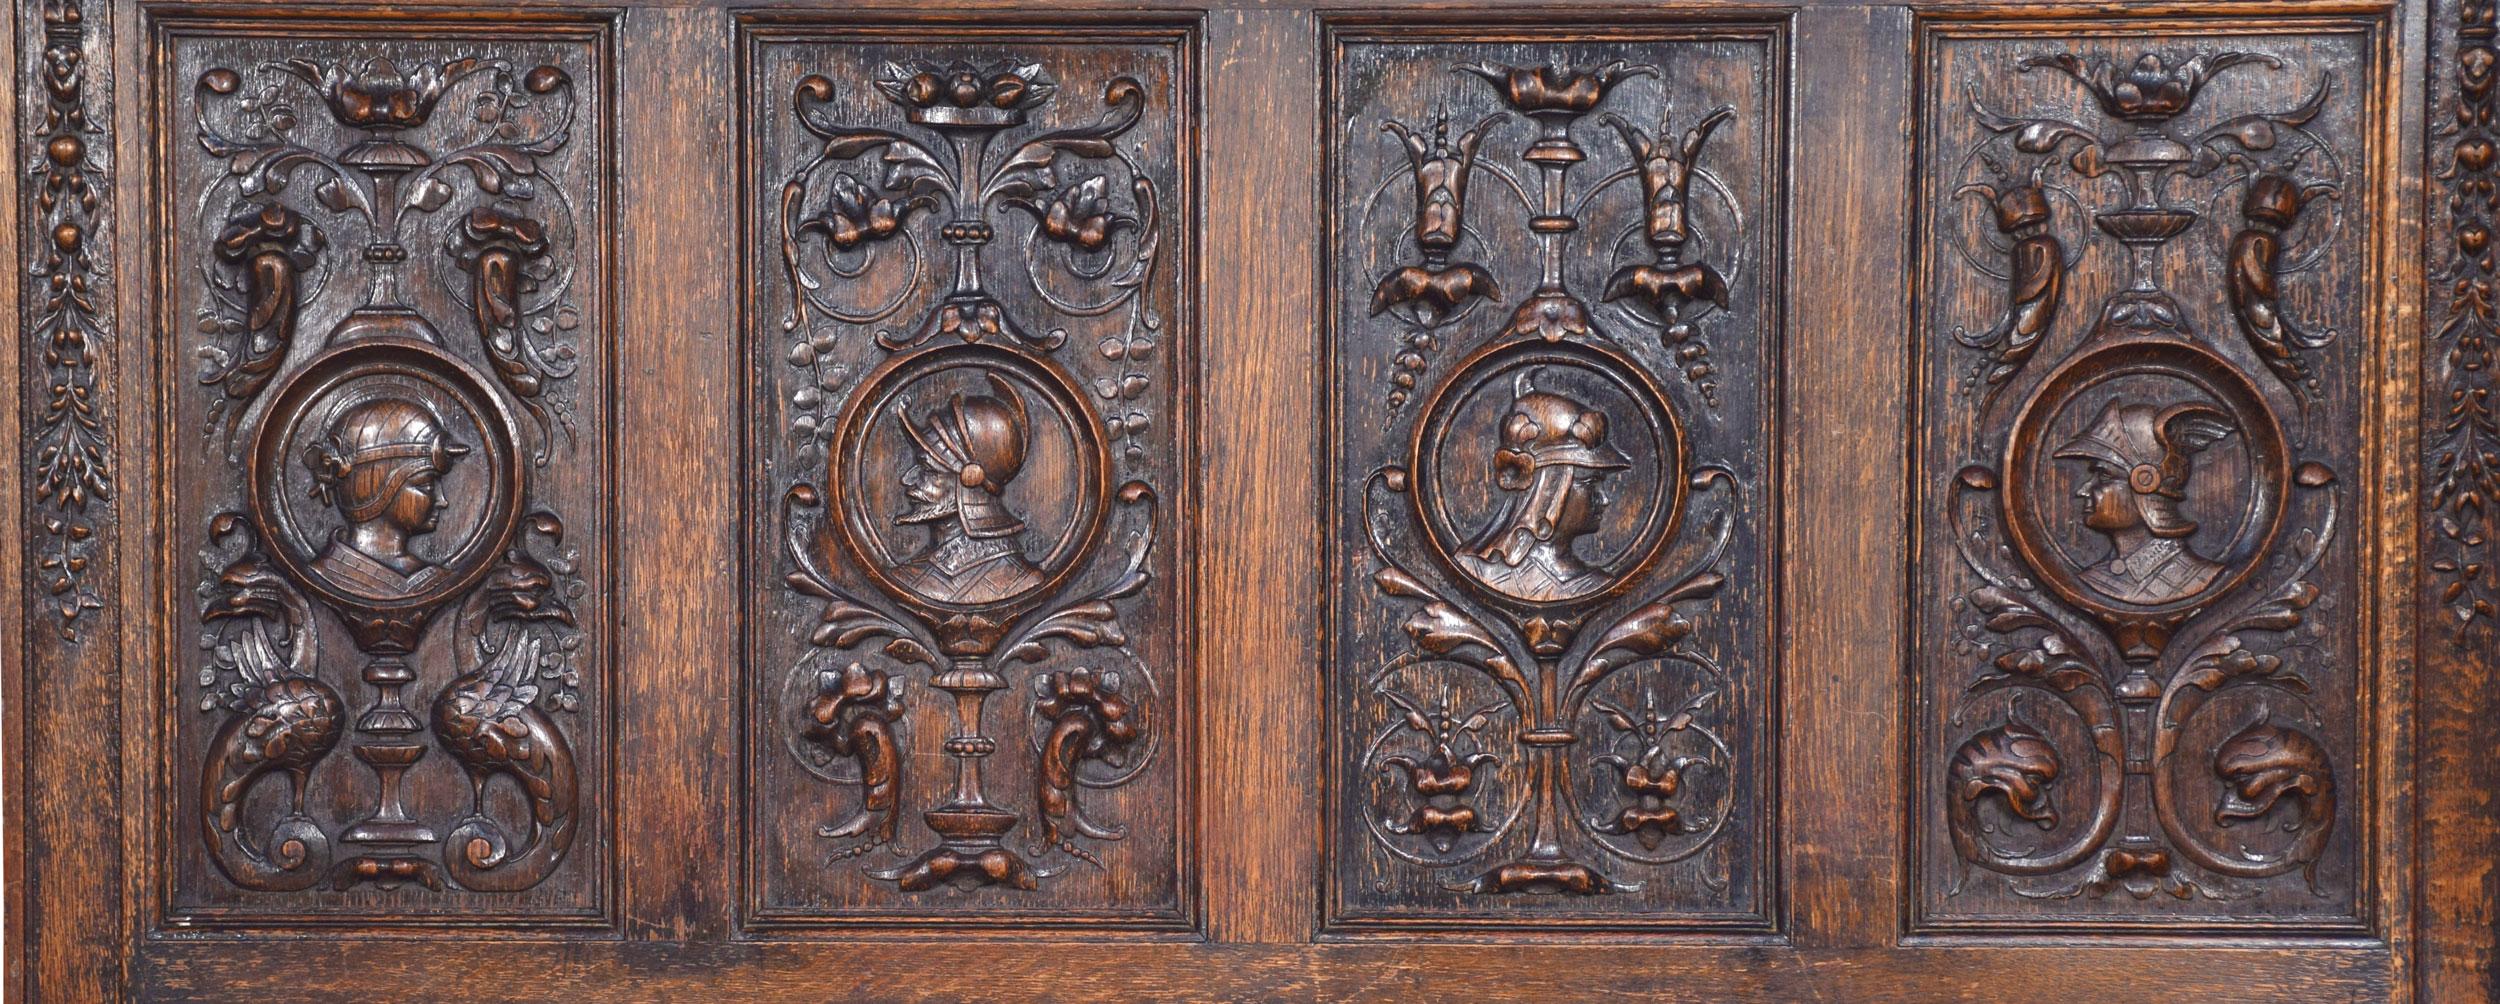 British Carved Oak Settle in the 17th Century Style